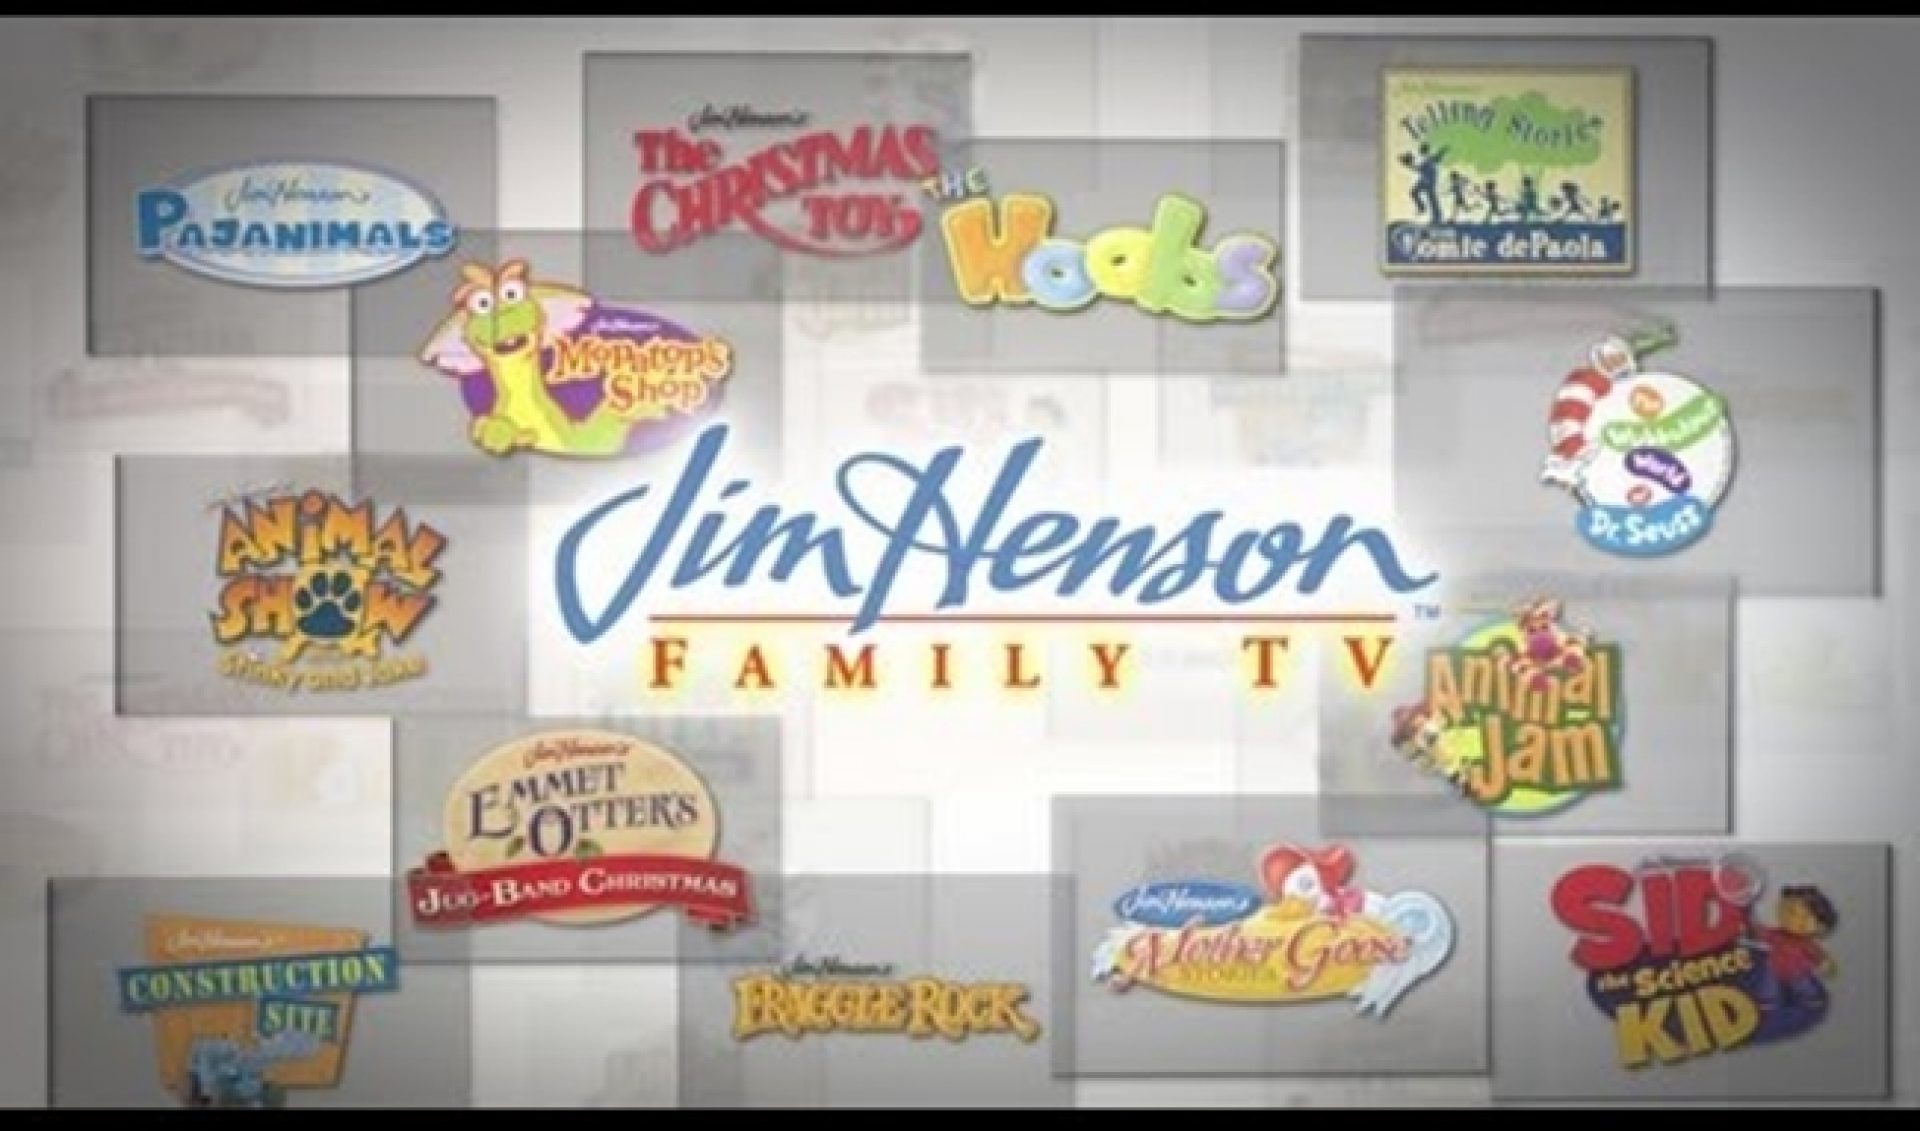 The Jim Henson Company And Base79 Team Up On YouTube